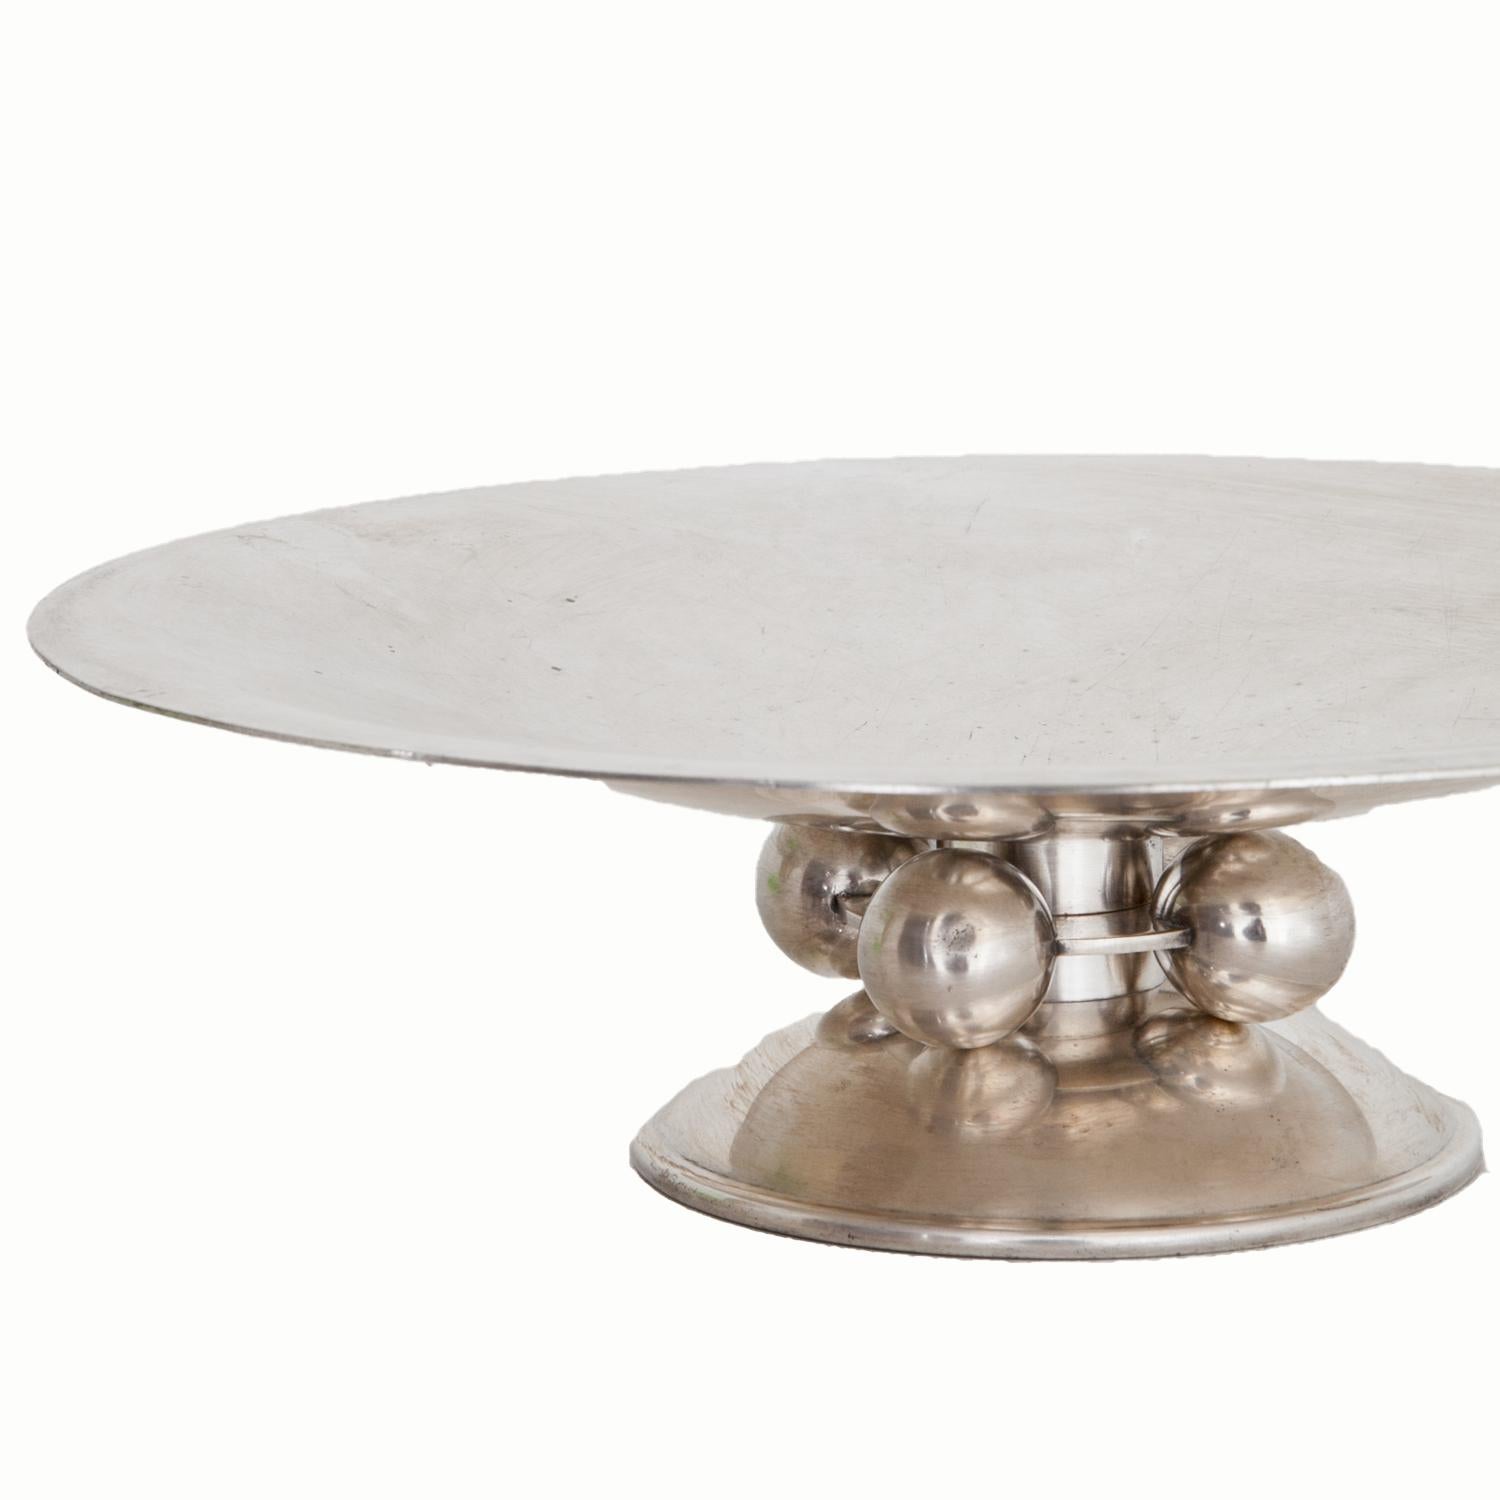 Silvered fruit bowl on a round stand with four sphere ornaments and a shallow well. Marked on the bottom Christofle. Condition B.